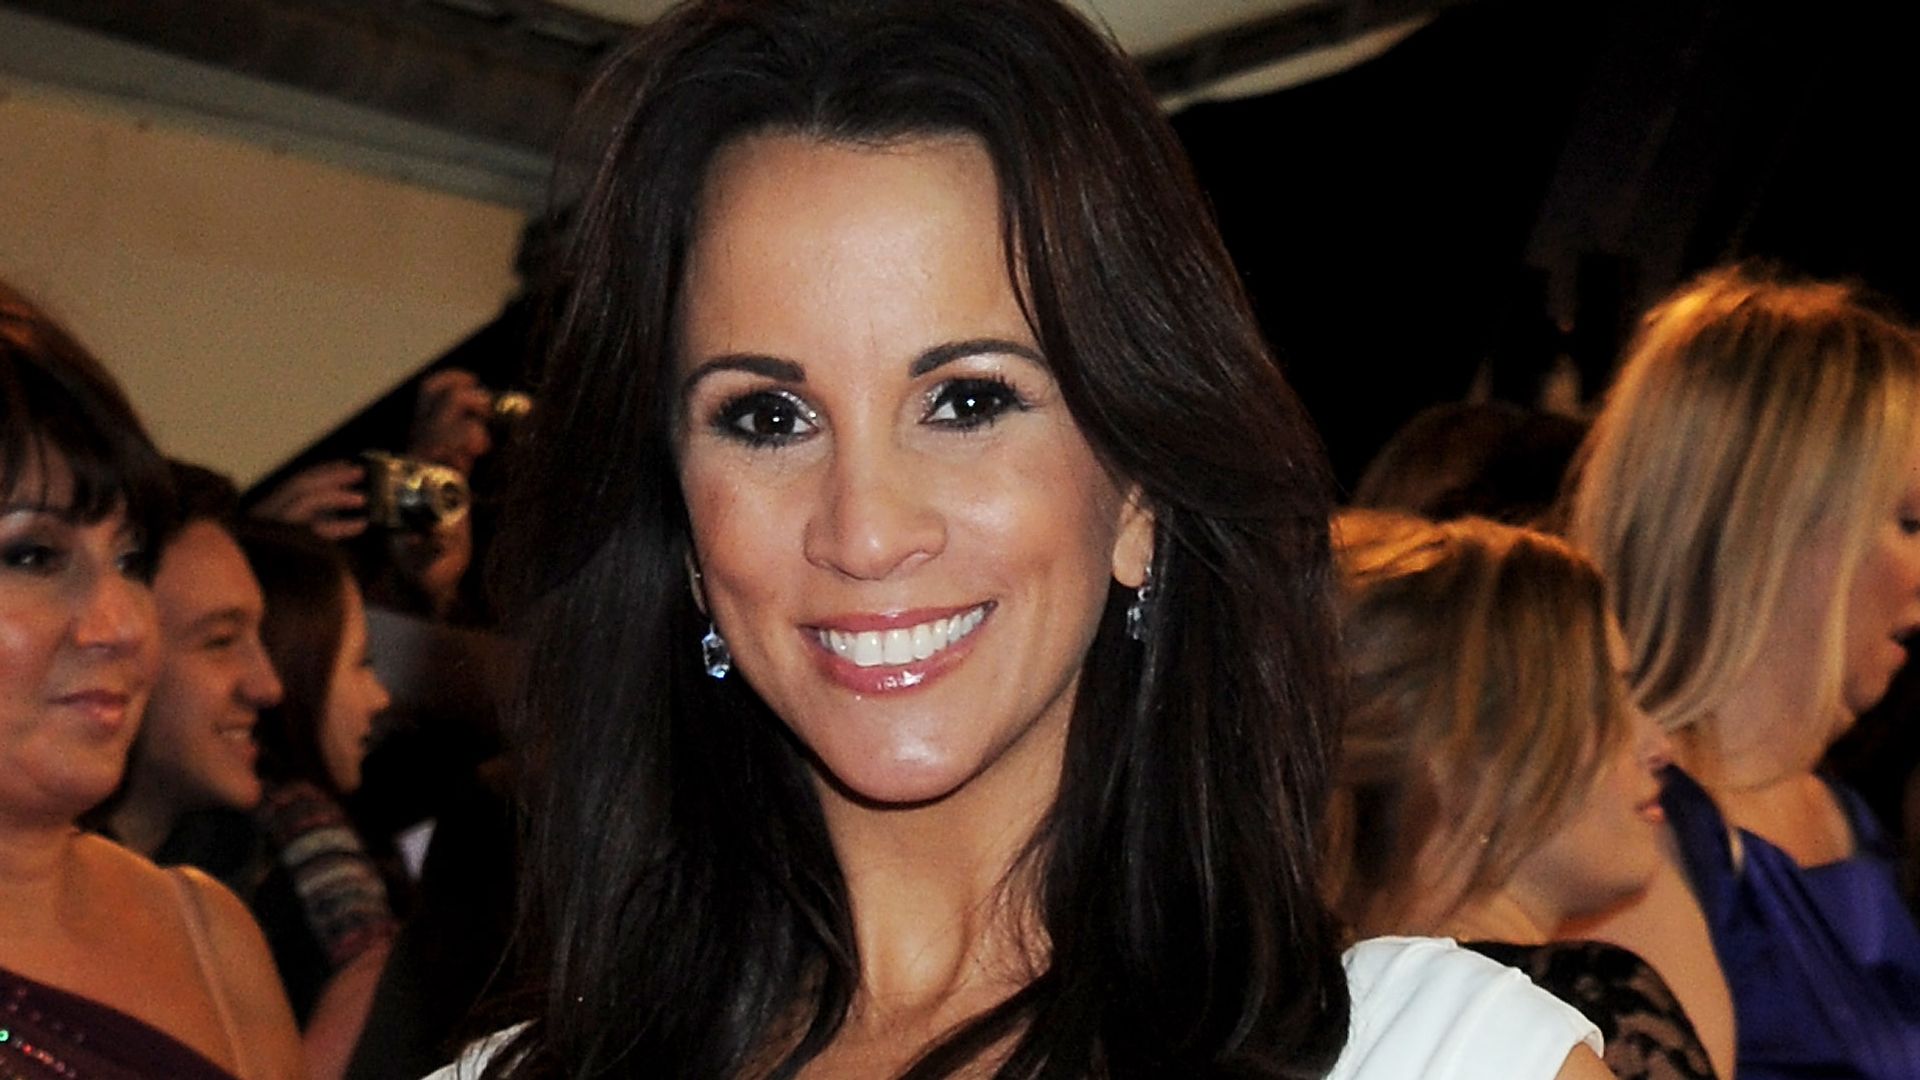 Andrea McLean in a white and black dress at the National Television Awards 2012